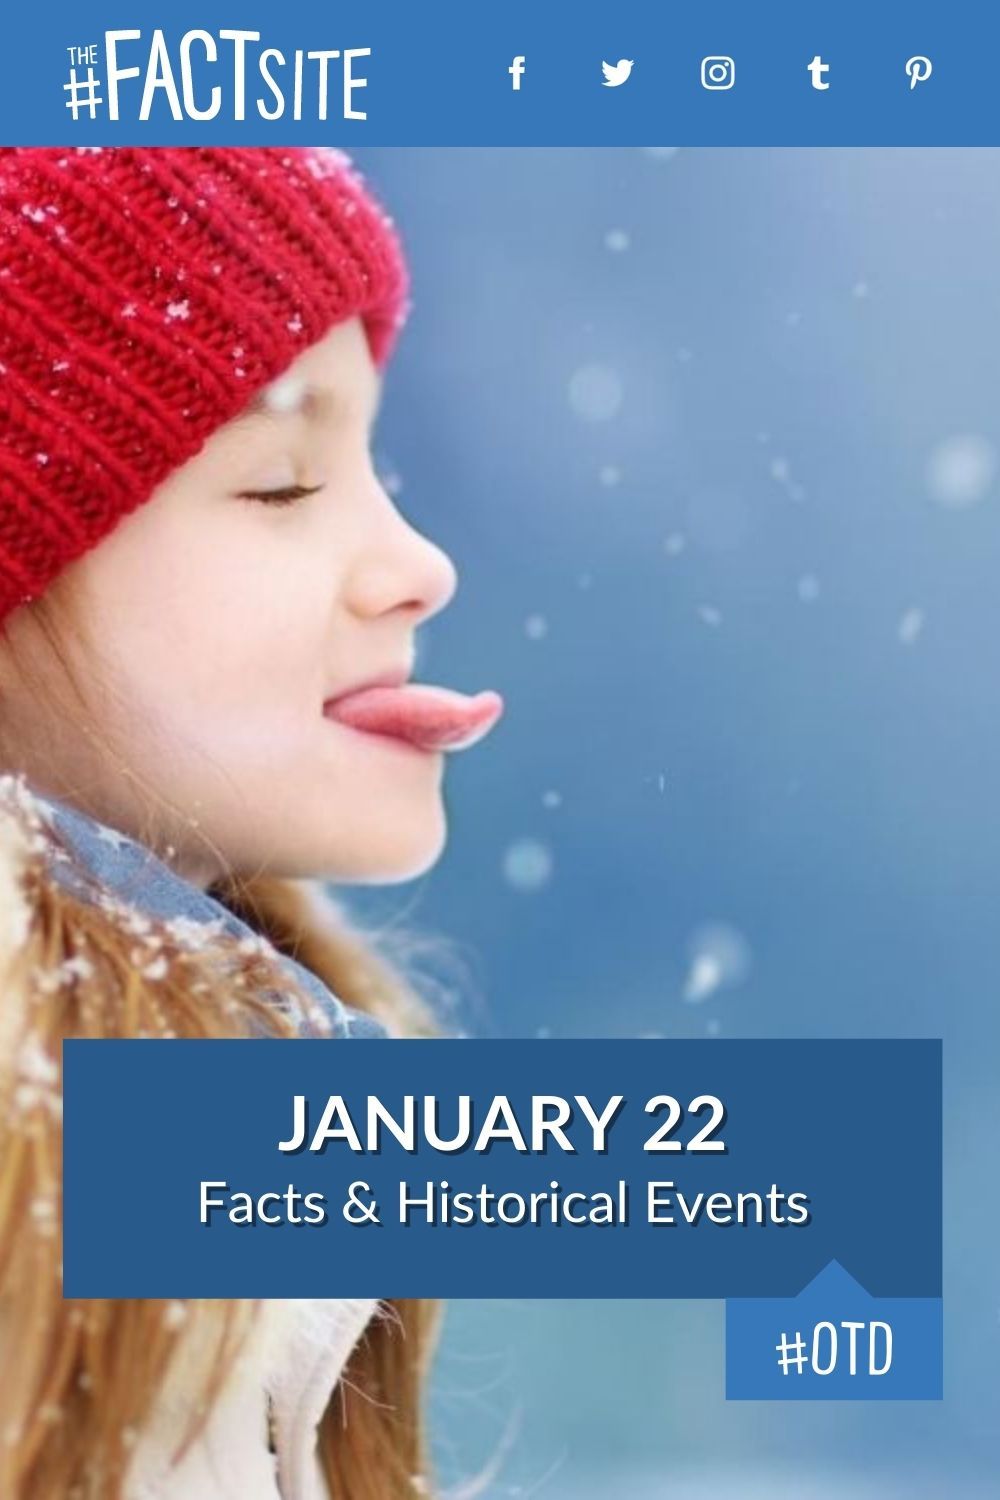 January 22: Facts & Historical Events On This Day